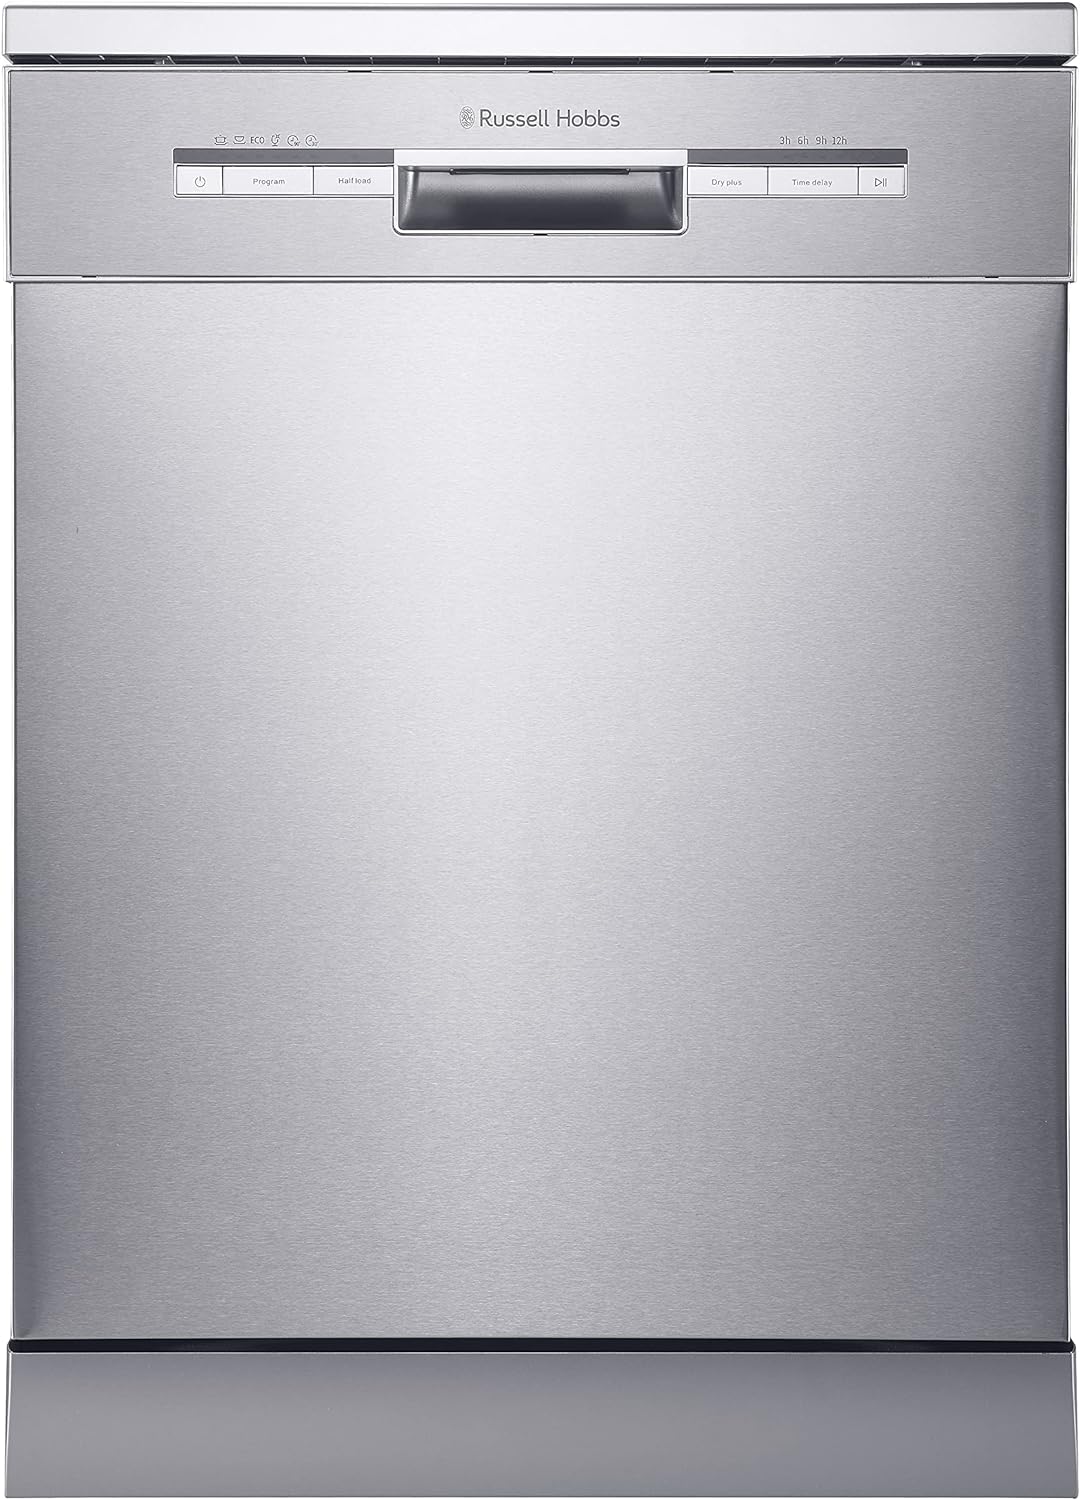 Russell Hobbs Stainless Steel Effect Full Size, 60cm Wide Freestanding Dishwasher, 12 Place Settings, RHDW3SS - Amazing Gadgets Outlet